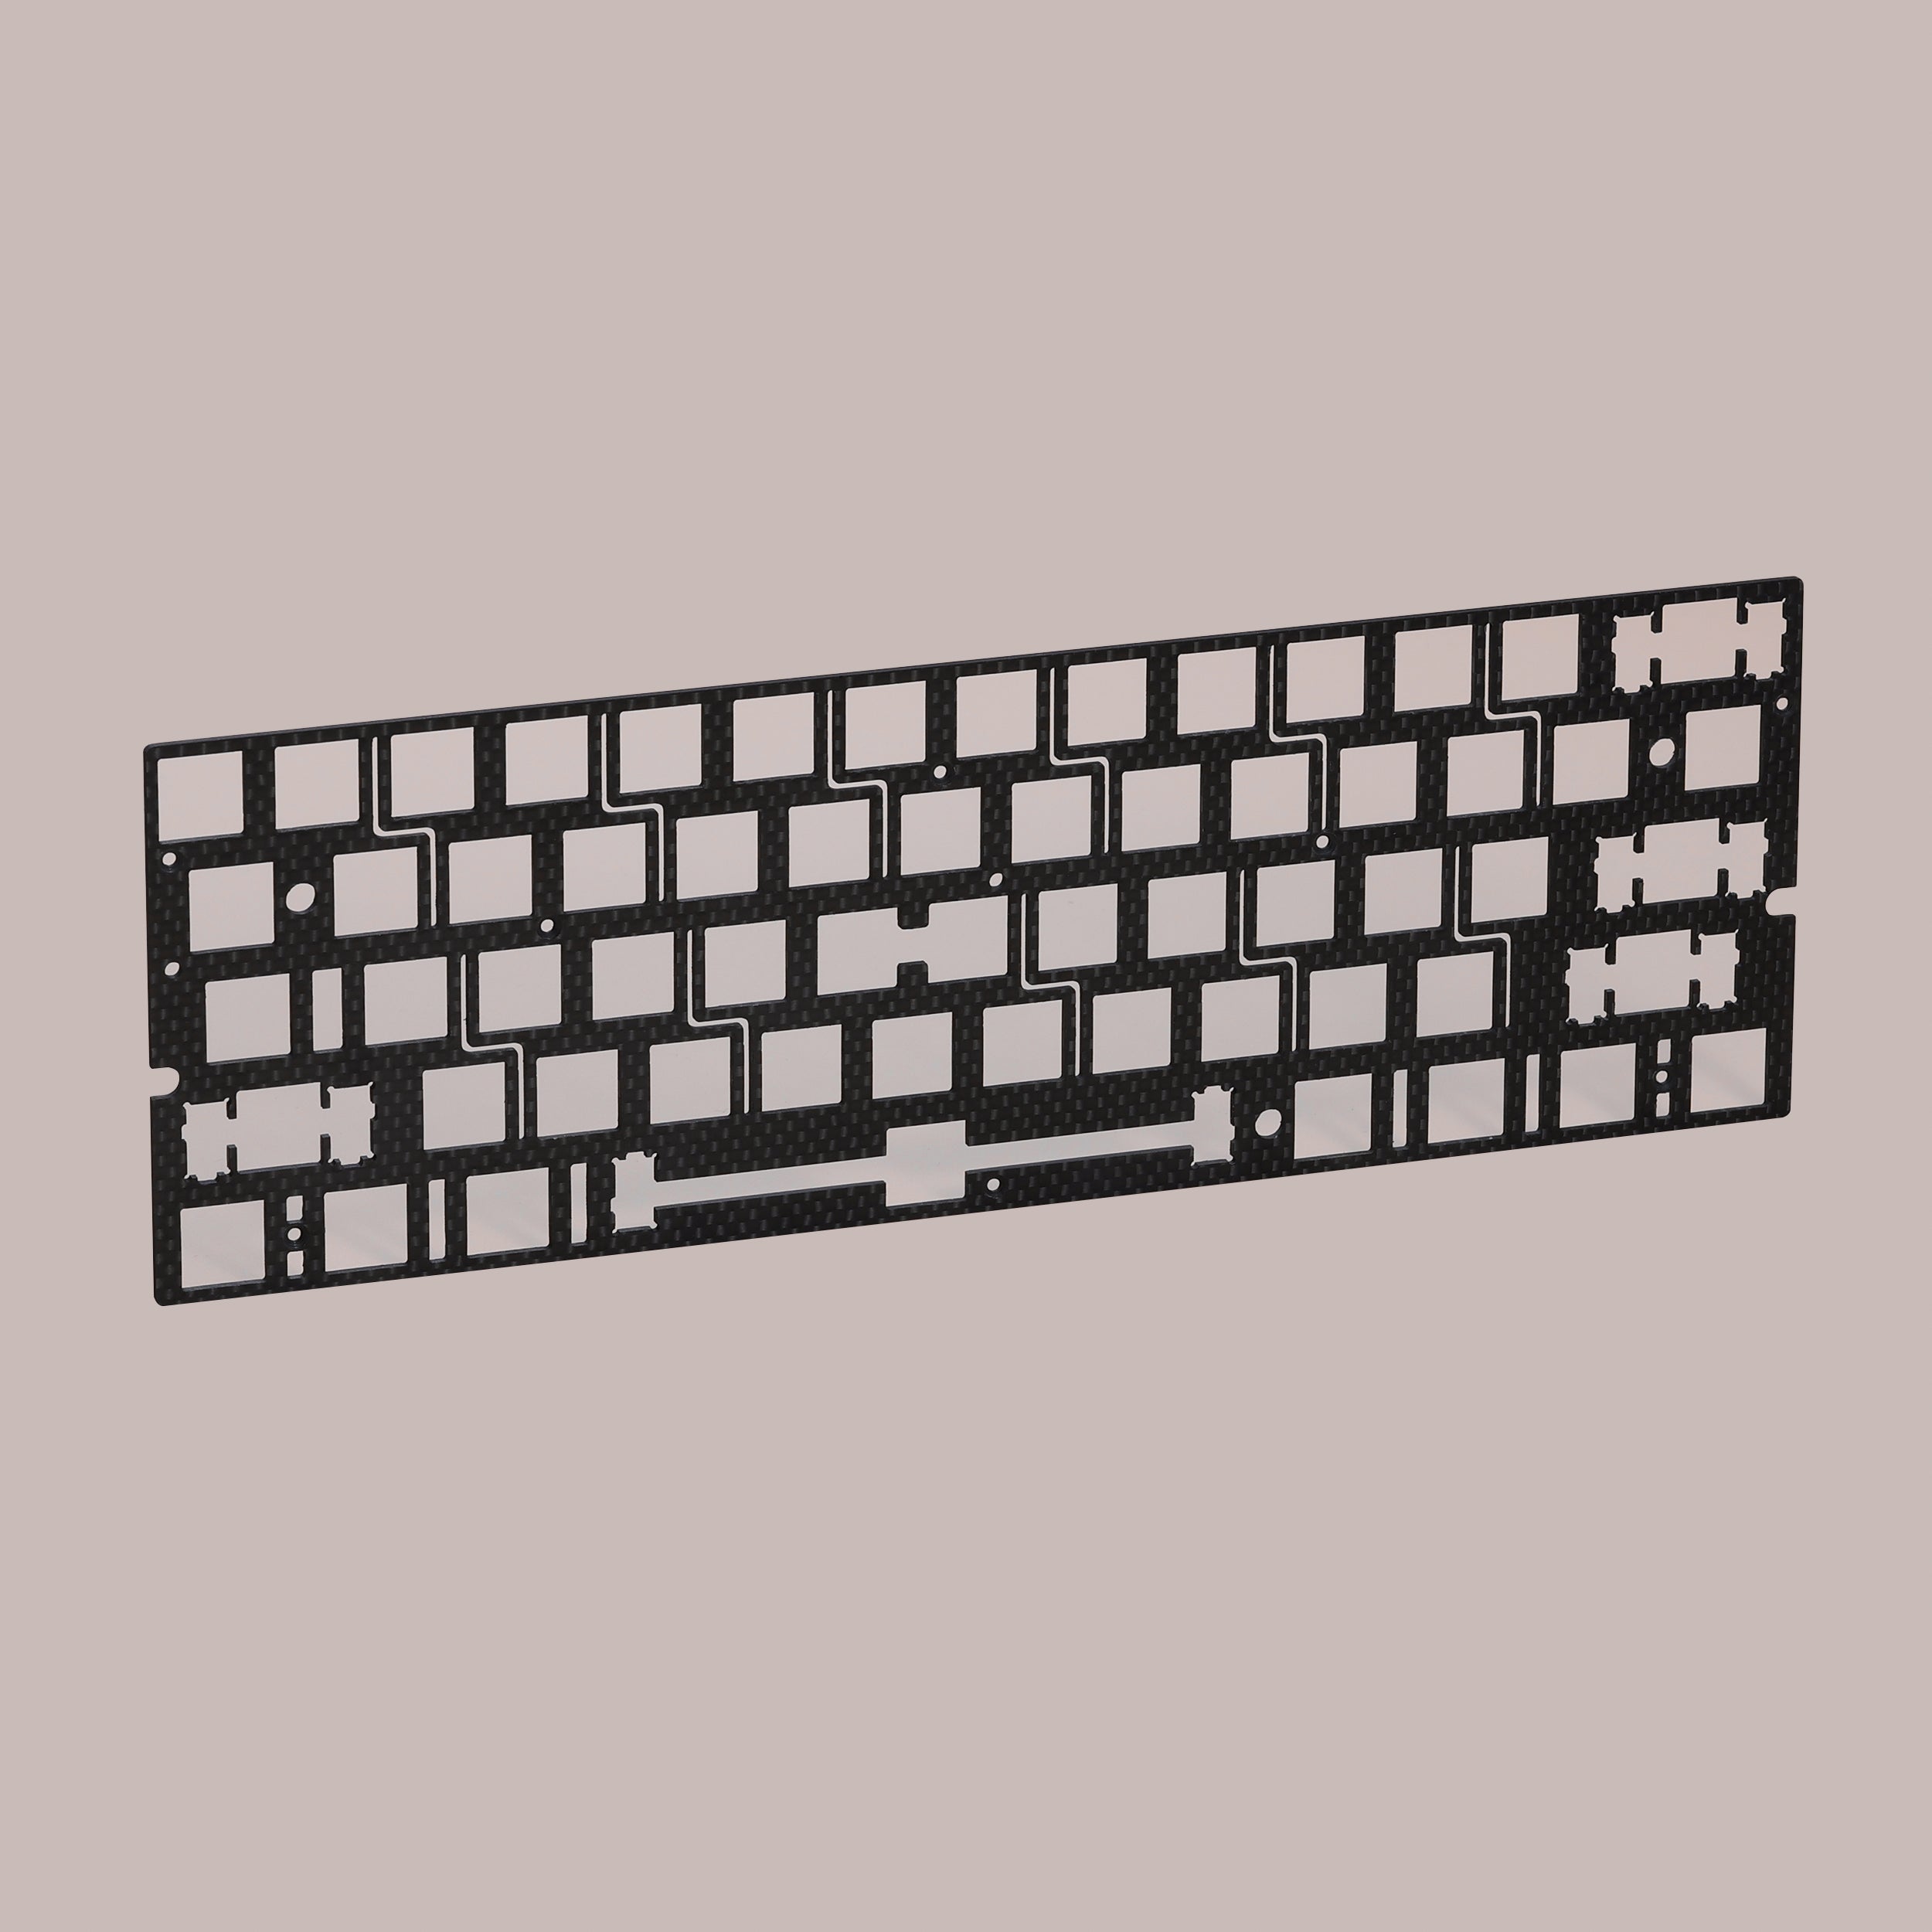 Compatible accessories for Wooting 60HE ANSI – KBDfans® Mechanical